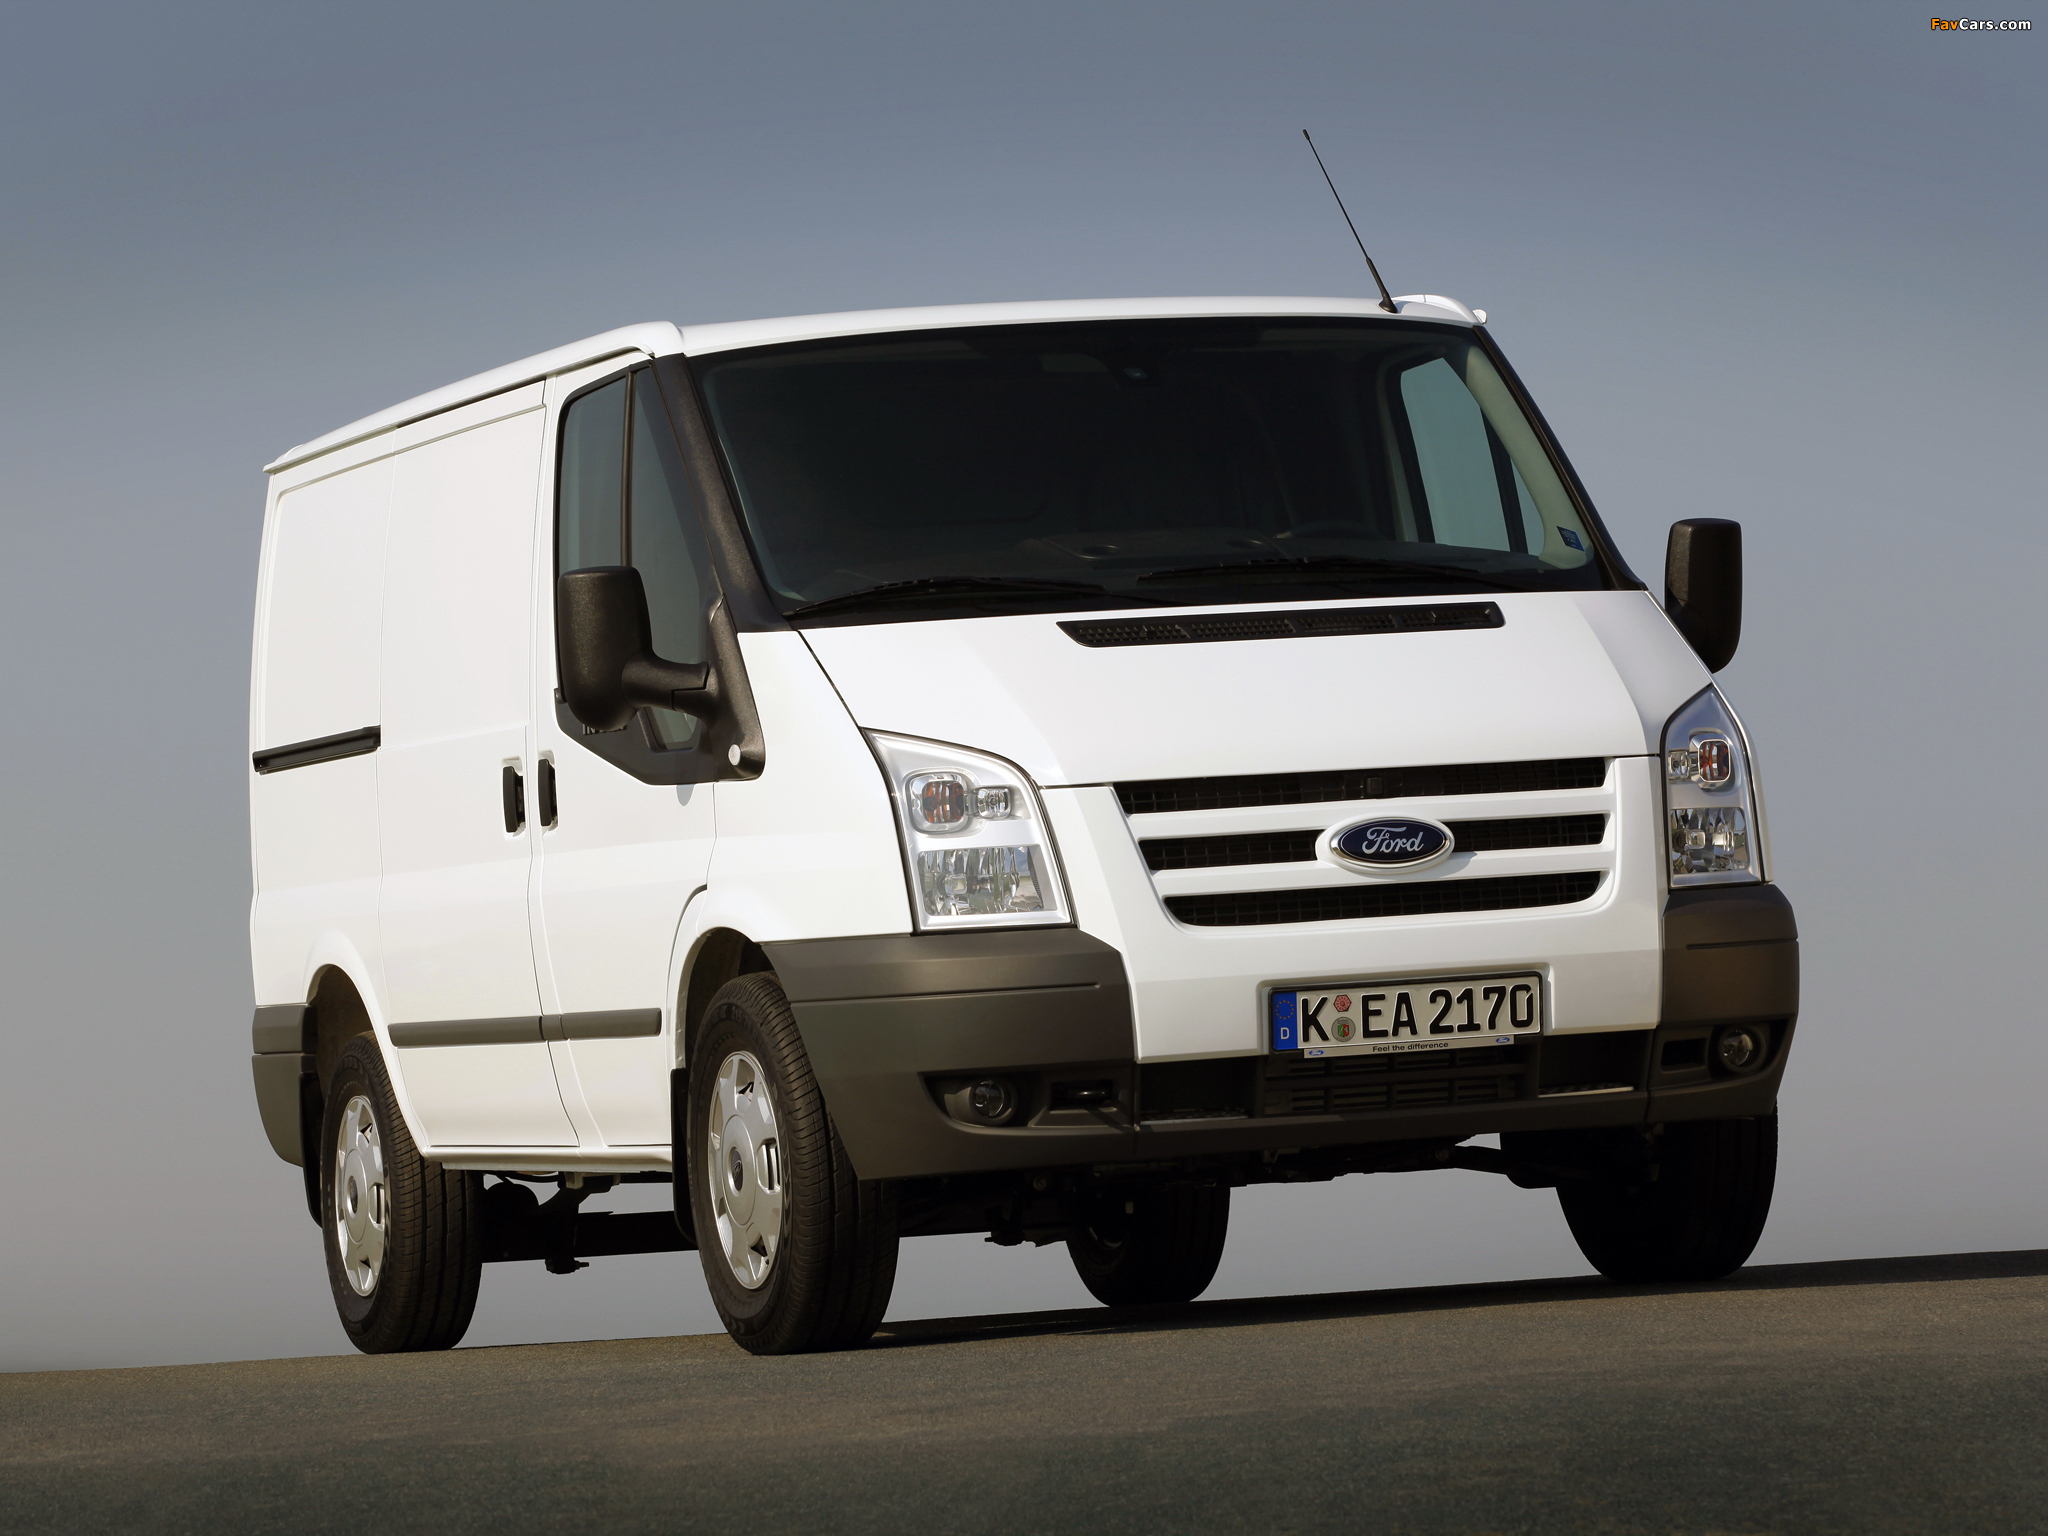 Форд транзит 2.0 2000 2006. Ford Transit 2006. Ford Transit 2006 2.2. Ford Transit LWB van 2006. Ford Transit SWB.